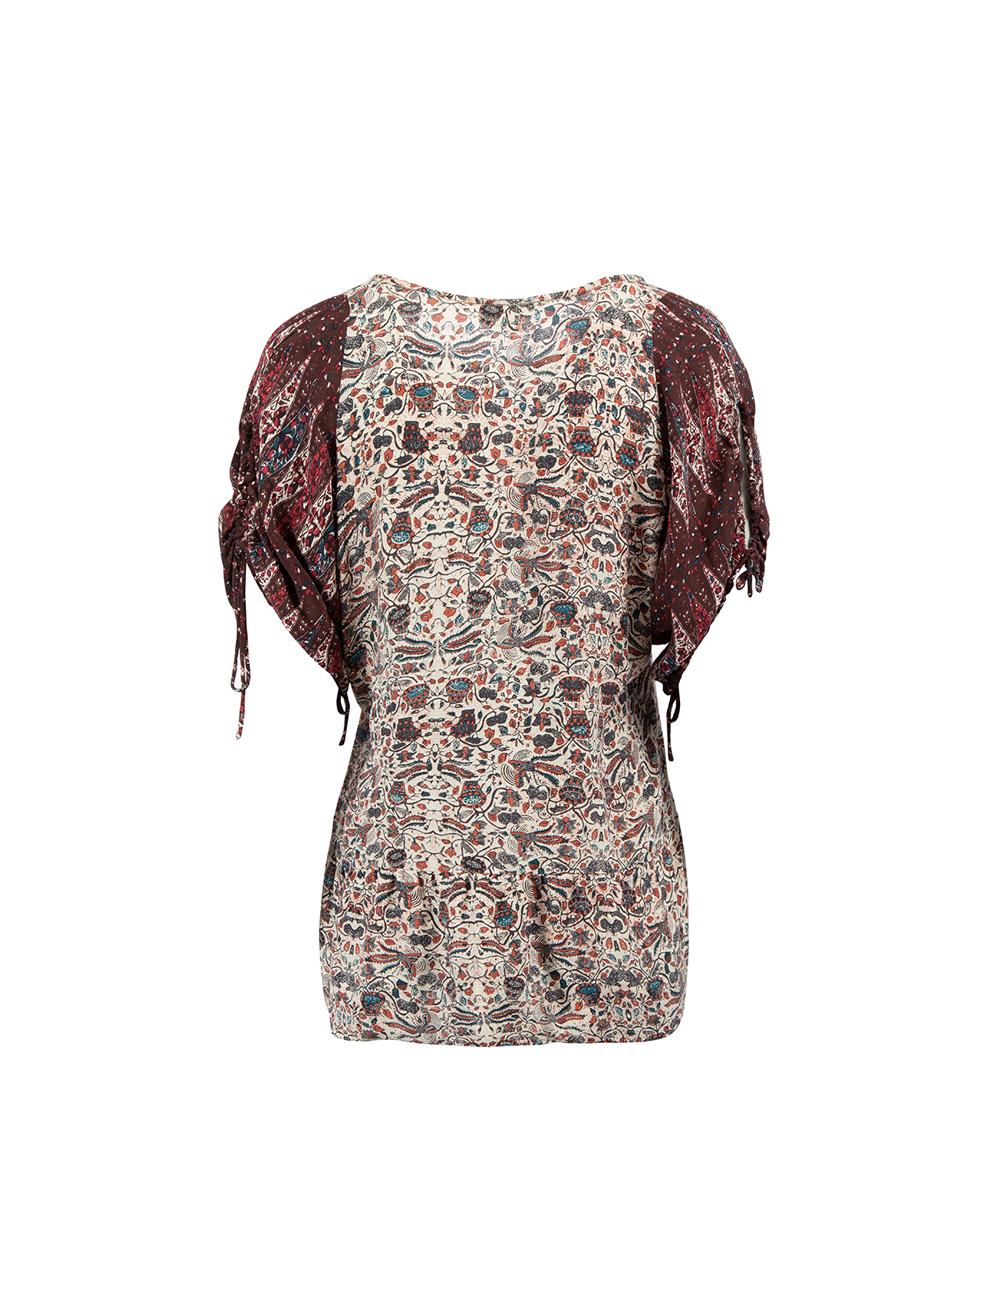 Isabel Marant Étoile Burgundy Silk Printed Peplum Top Size M In Good Condition For Sale In London, GB